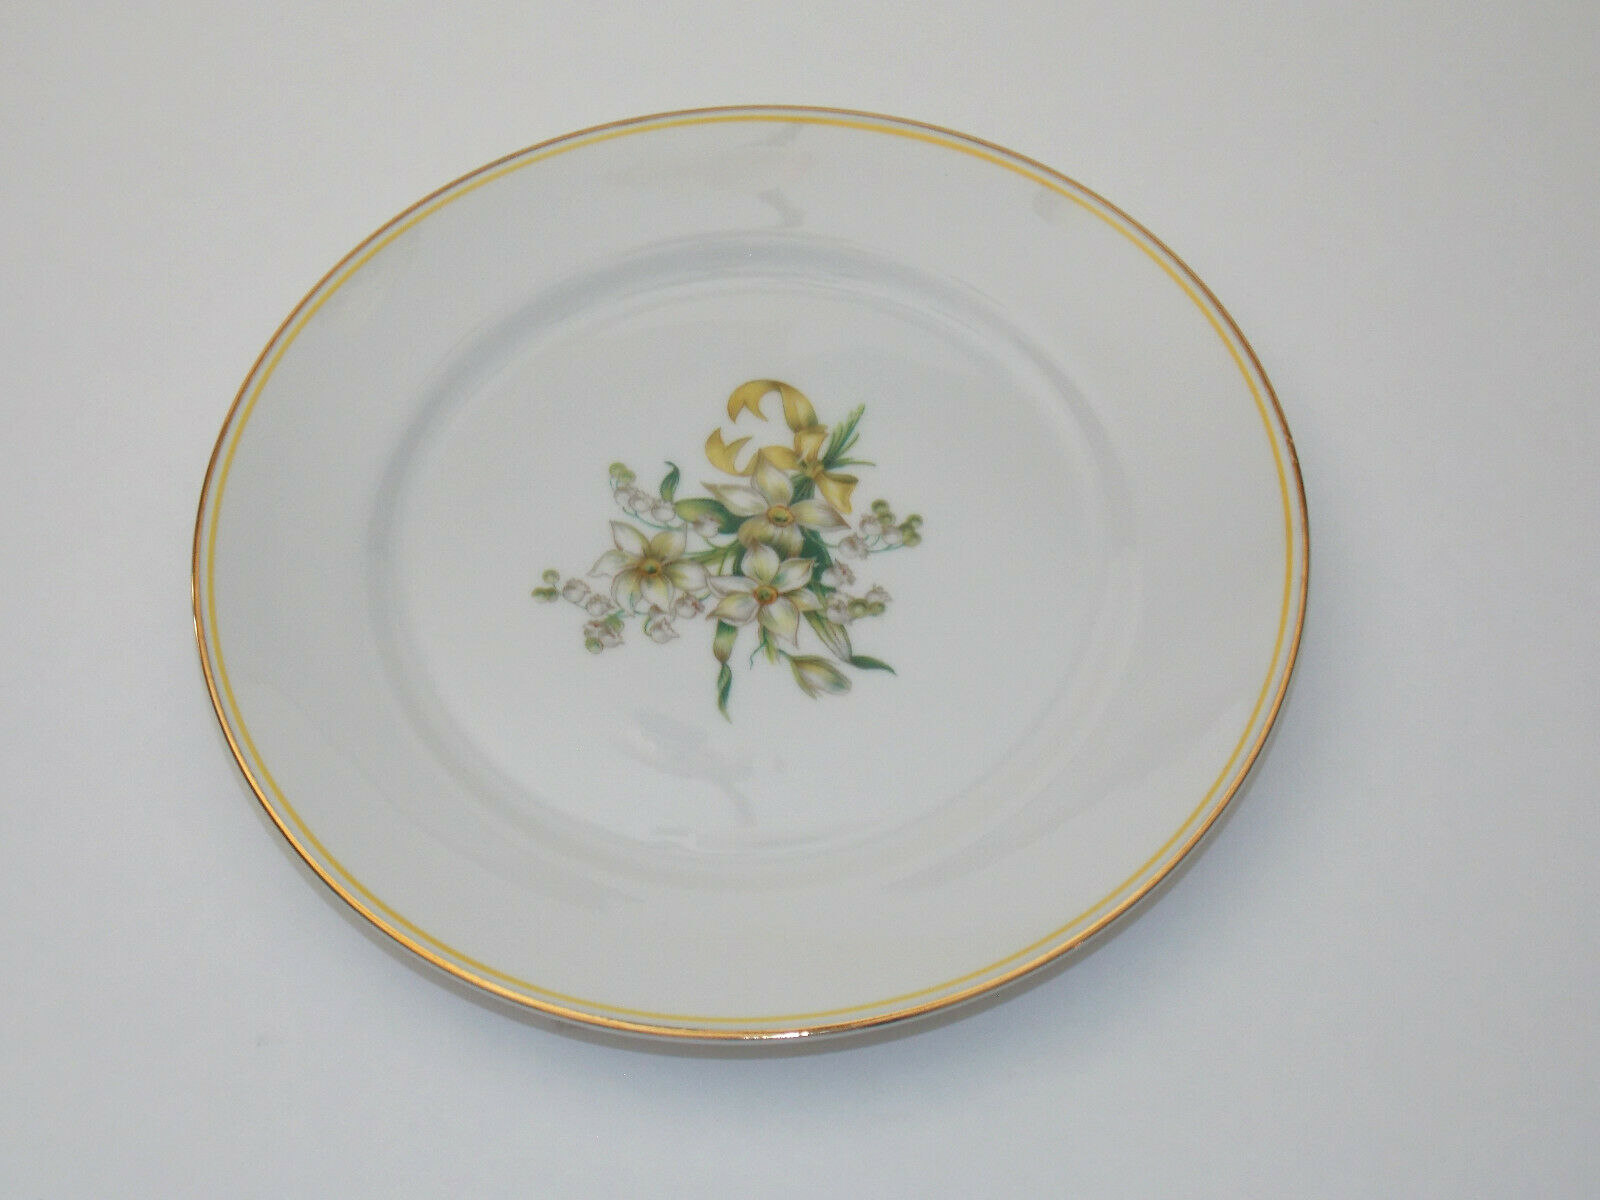 H&c Heinrich 8" Plate - Selb Bavaria Germany - White With Green/yellow Flowers